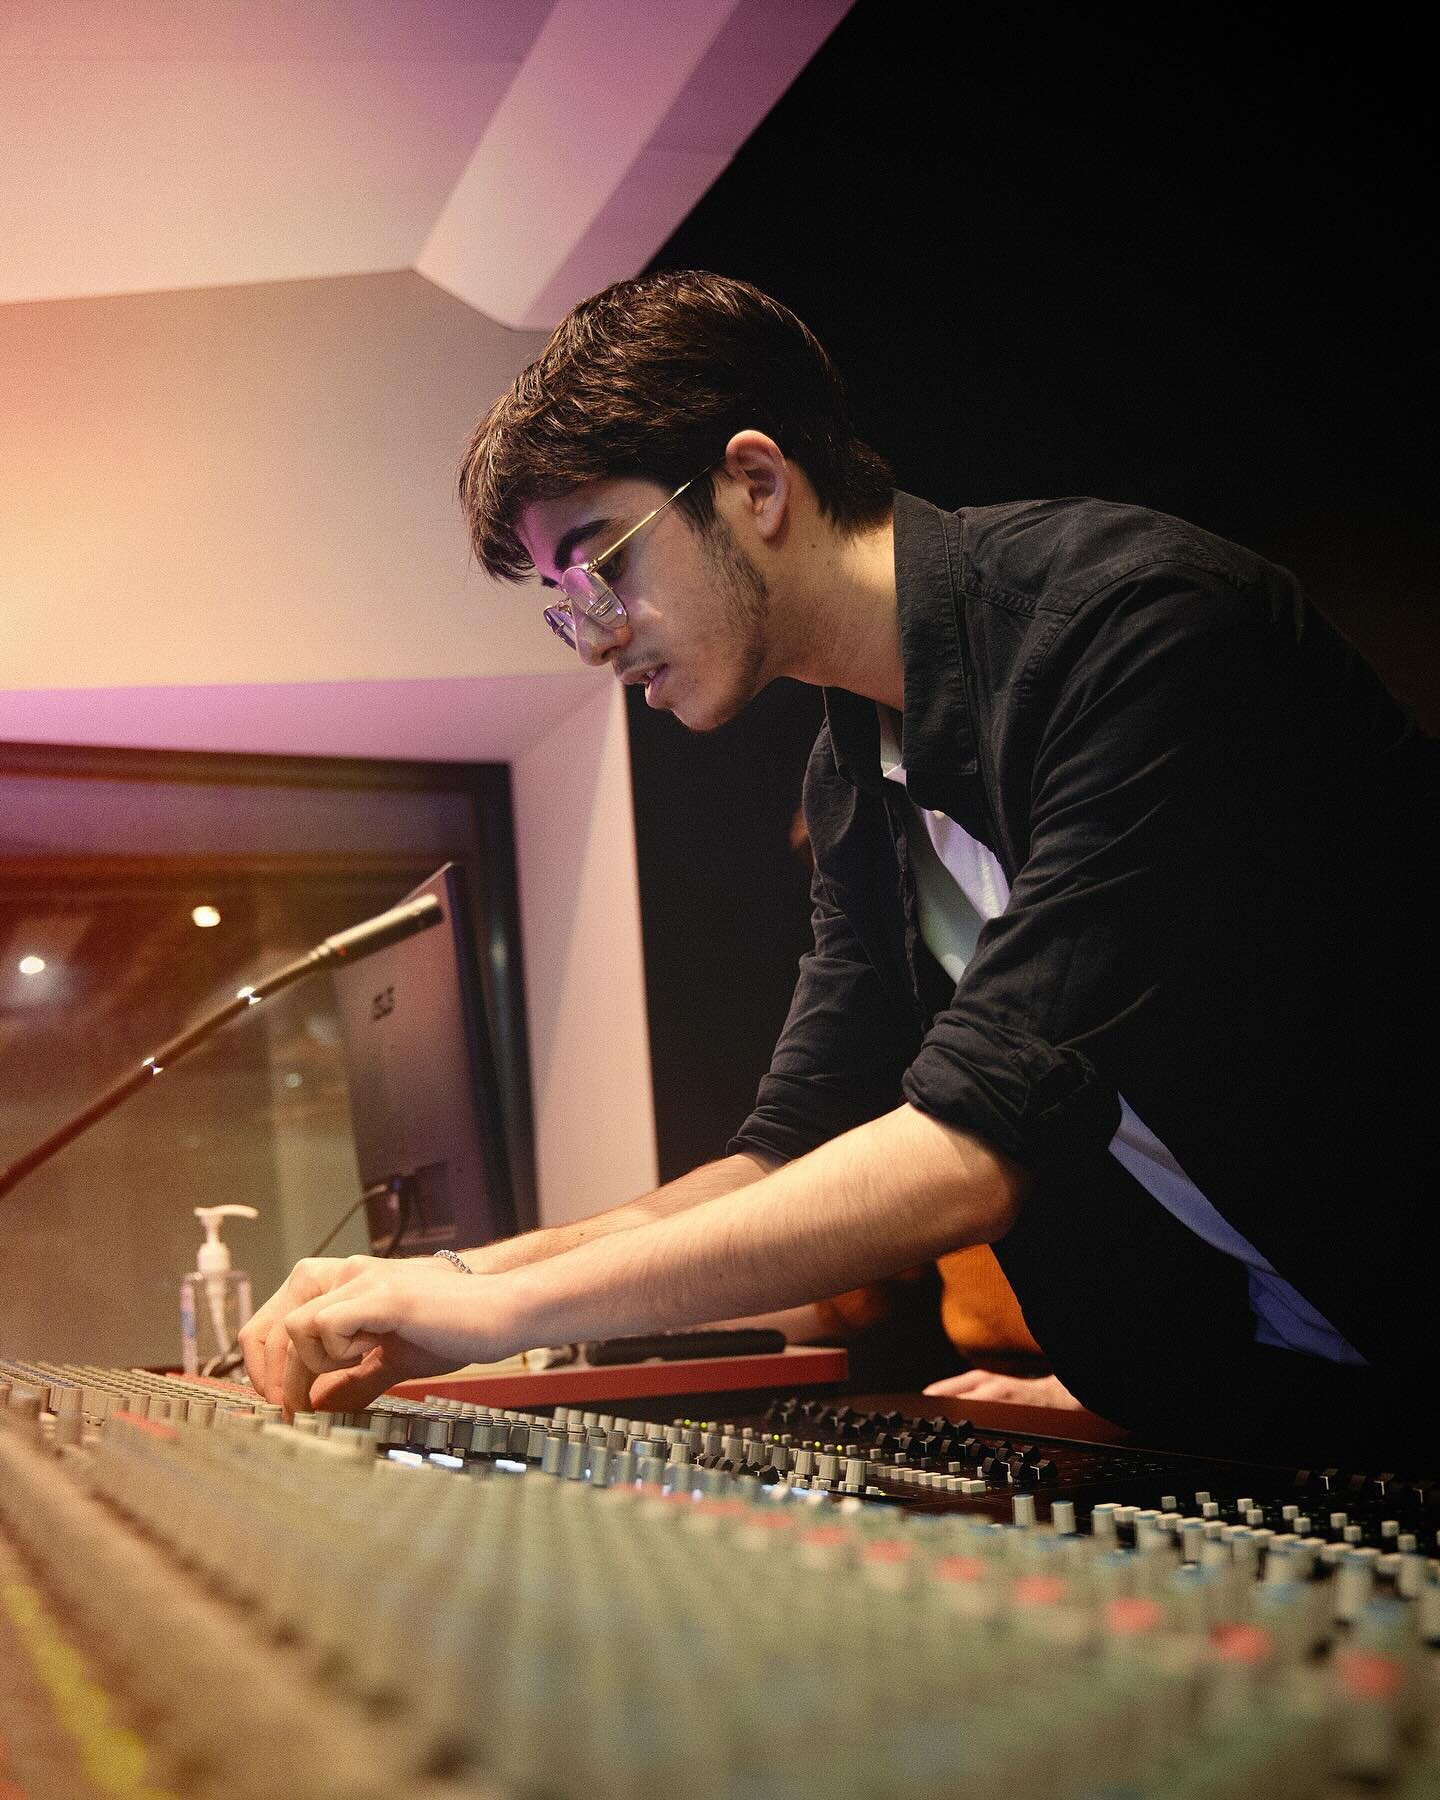 Welcome to the team, Reuben! - @lavitomusic 

Reuben, like all of us at Rosslyn Hill, was trained at Abbey Road Institute. As well as working at Rosslyn Hill, Reuben works freelance as a mix engineer and live sound engineer at various venues across L